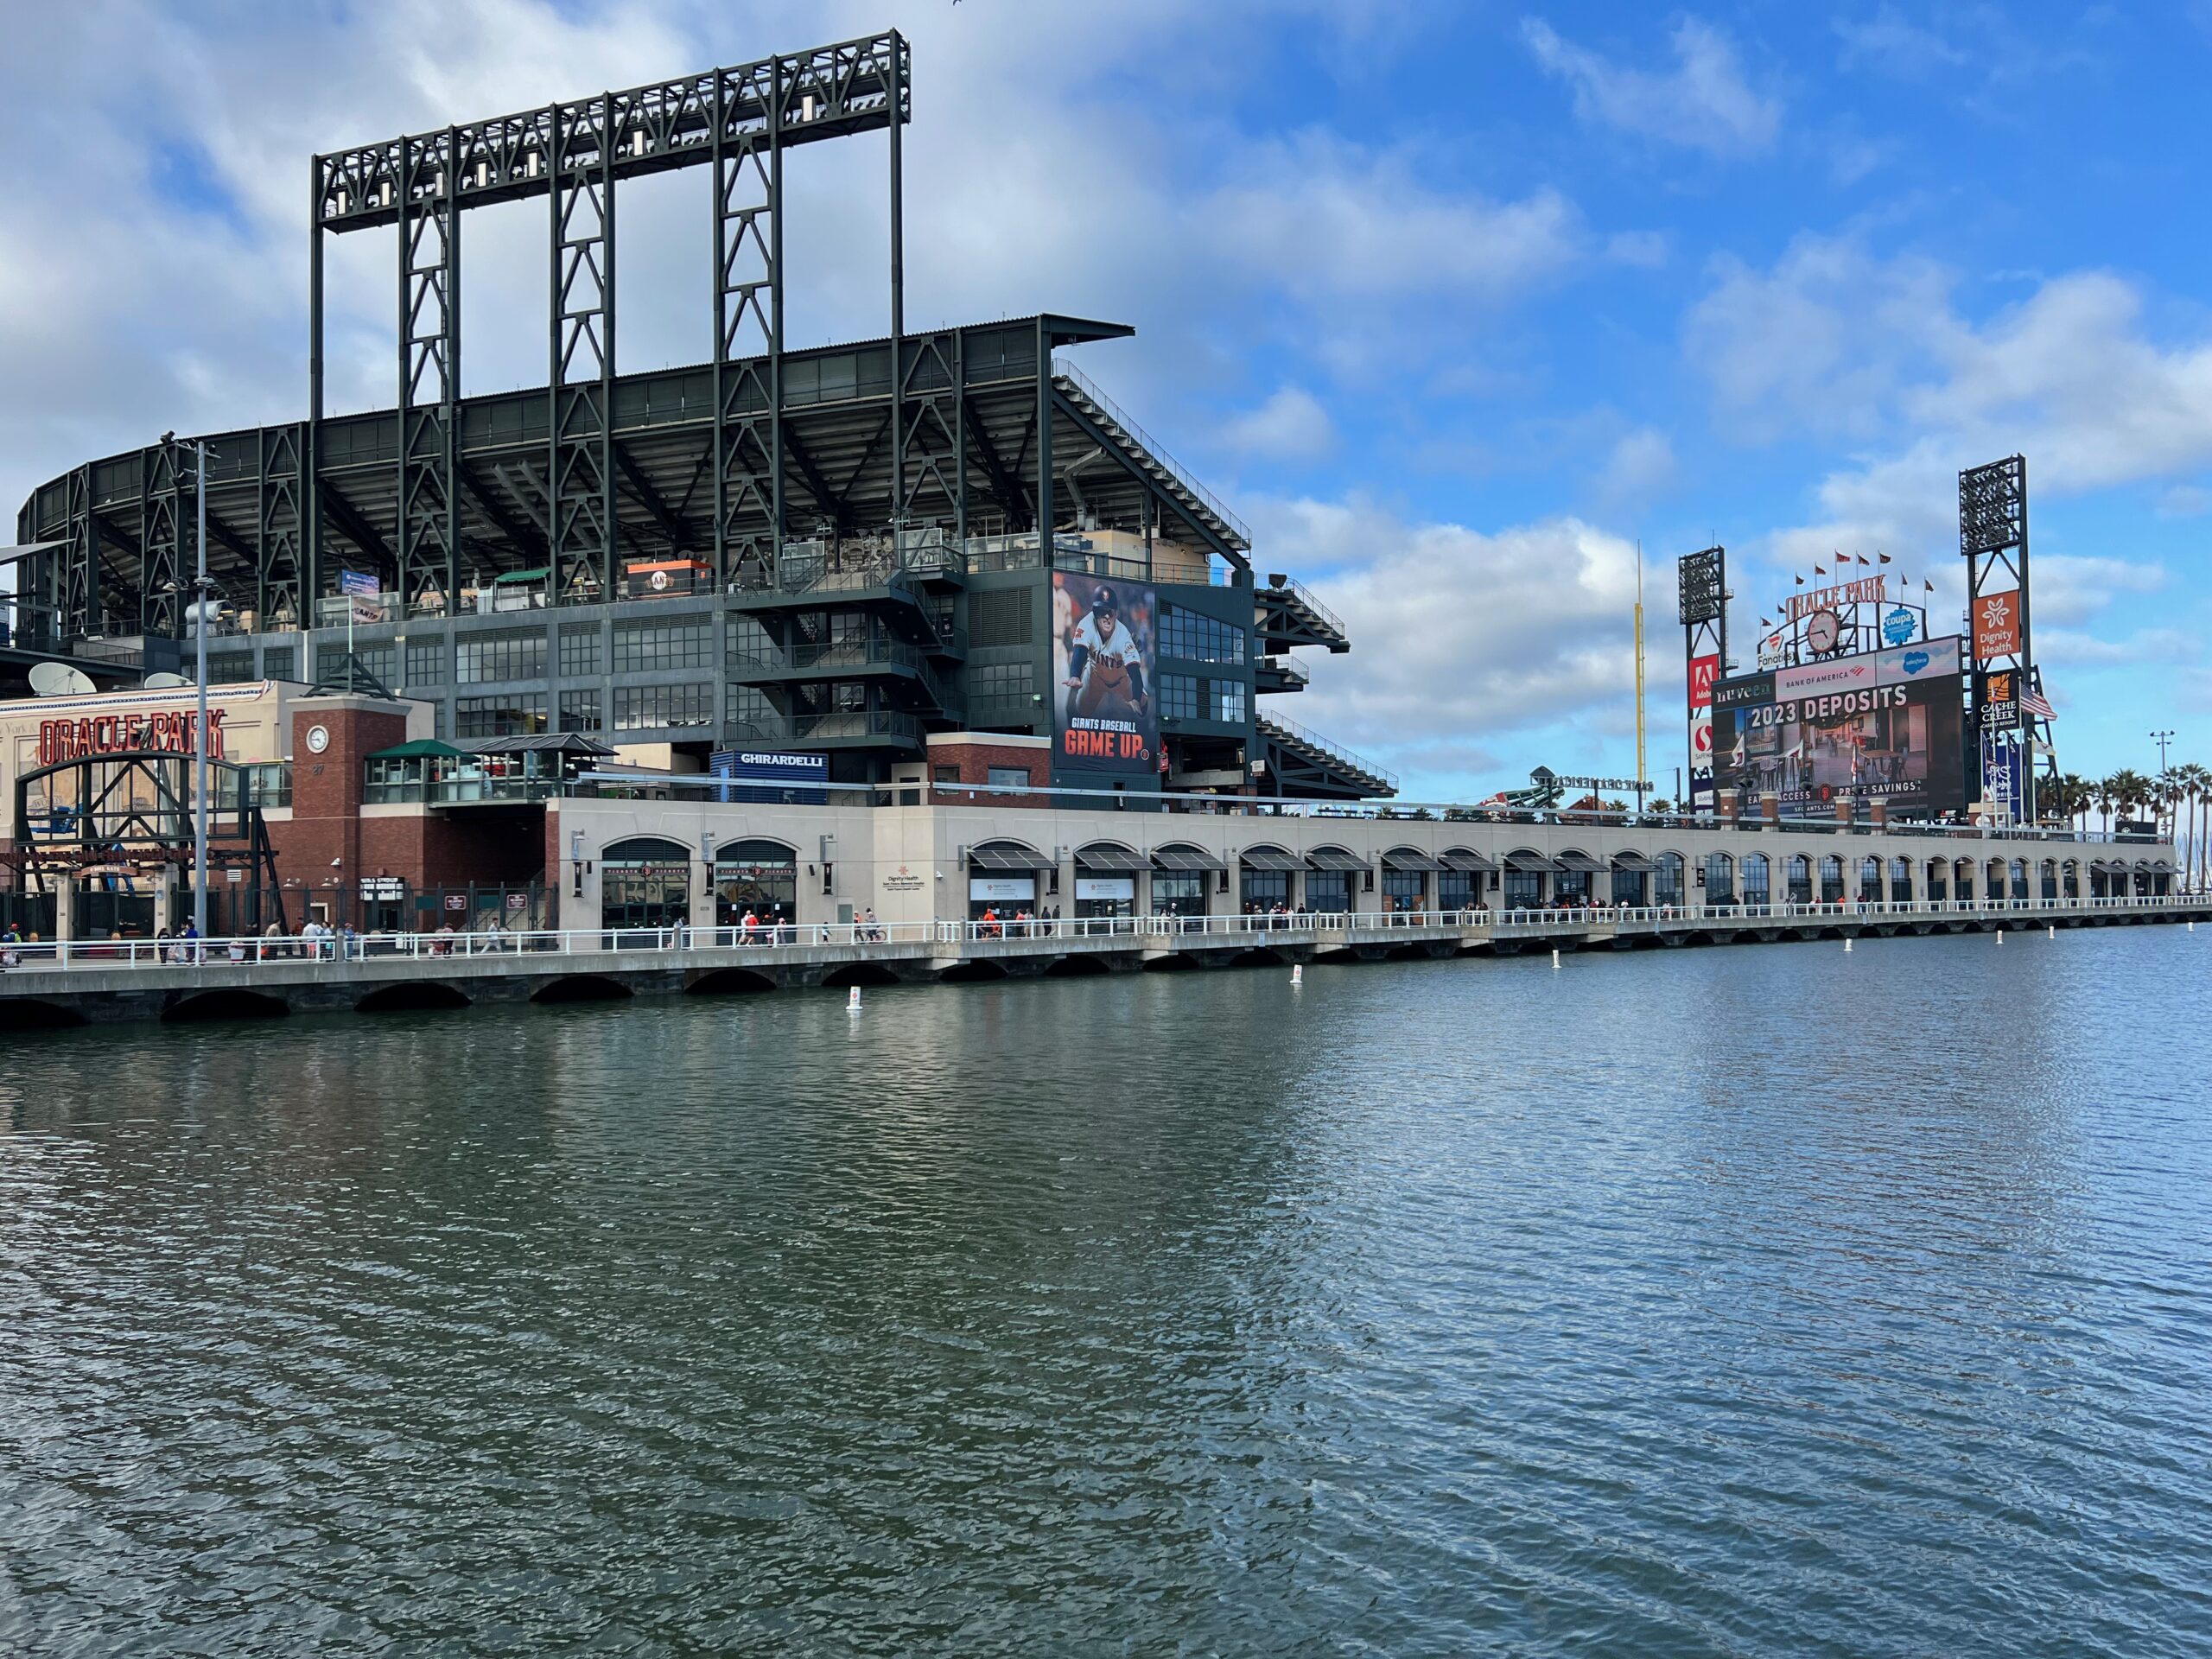 SF Giants' game vs. Padres delayed when Oracle Park lights malfunction